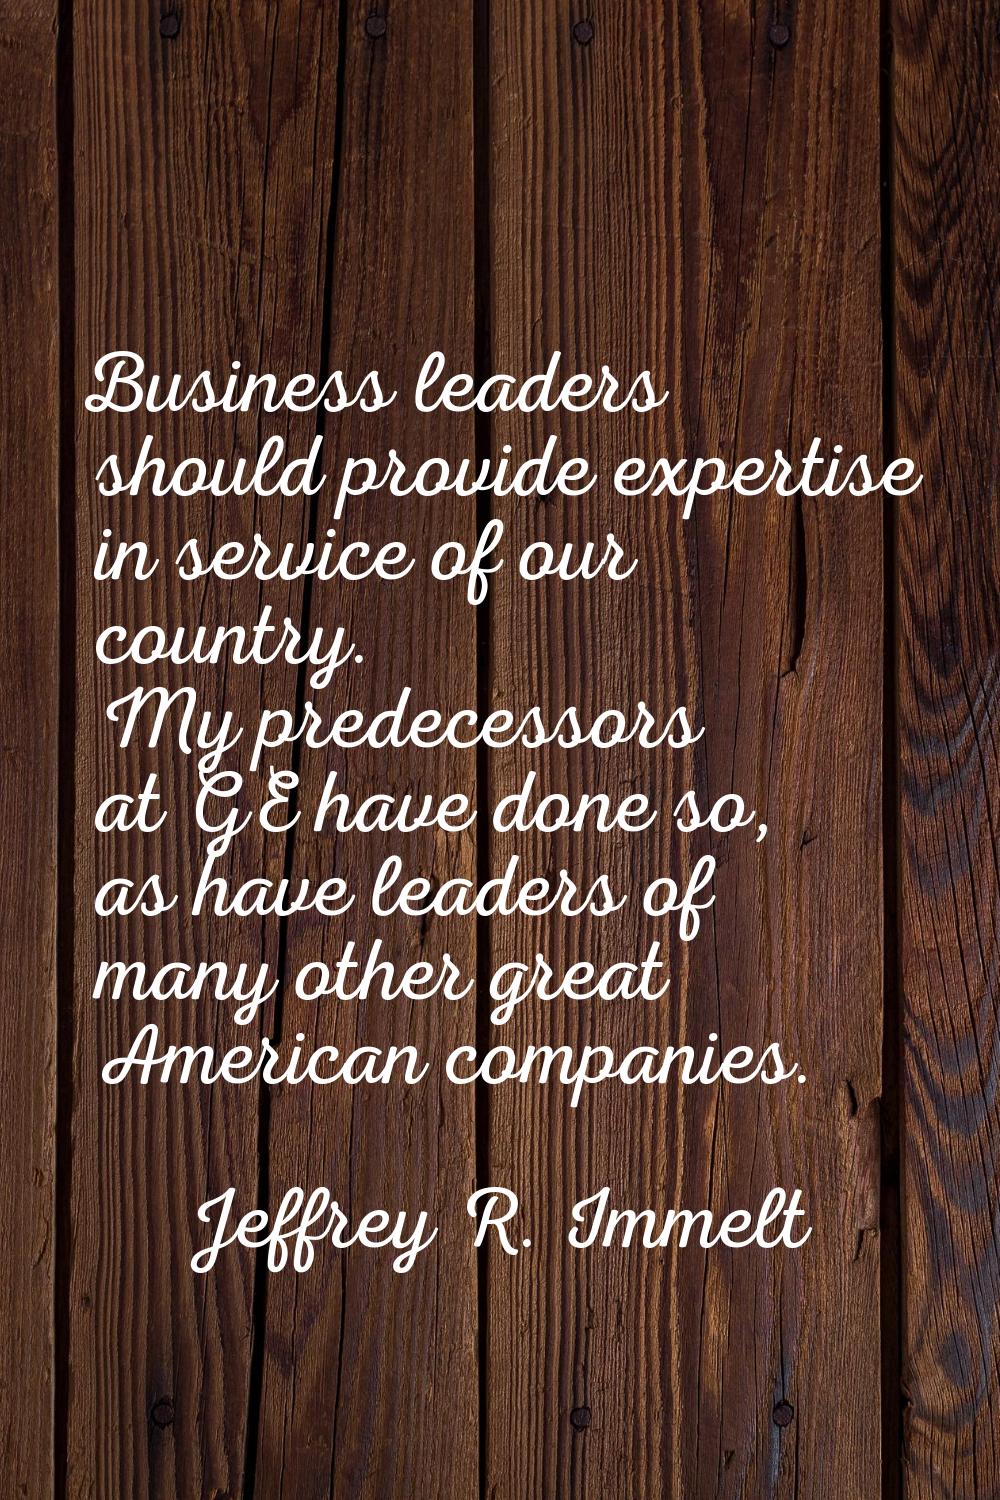 Business leaders should provide expertise in service of our country. My predecessors at GE have don